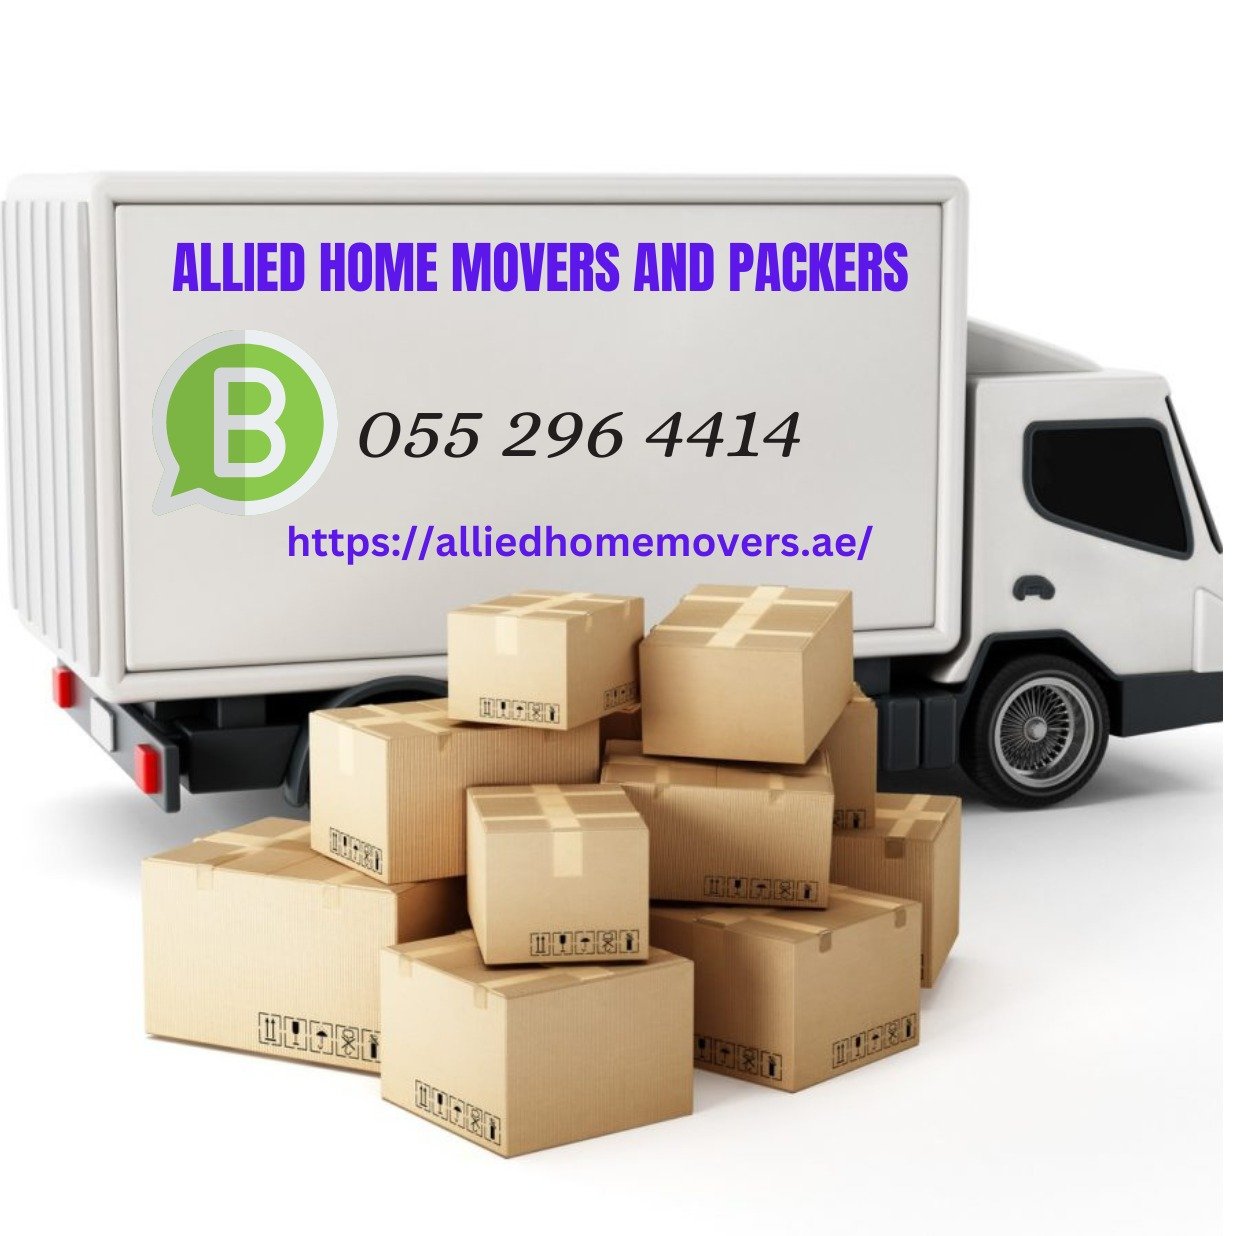 Allied Home Movers And Packers Abu Dhabi